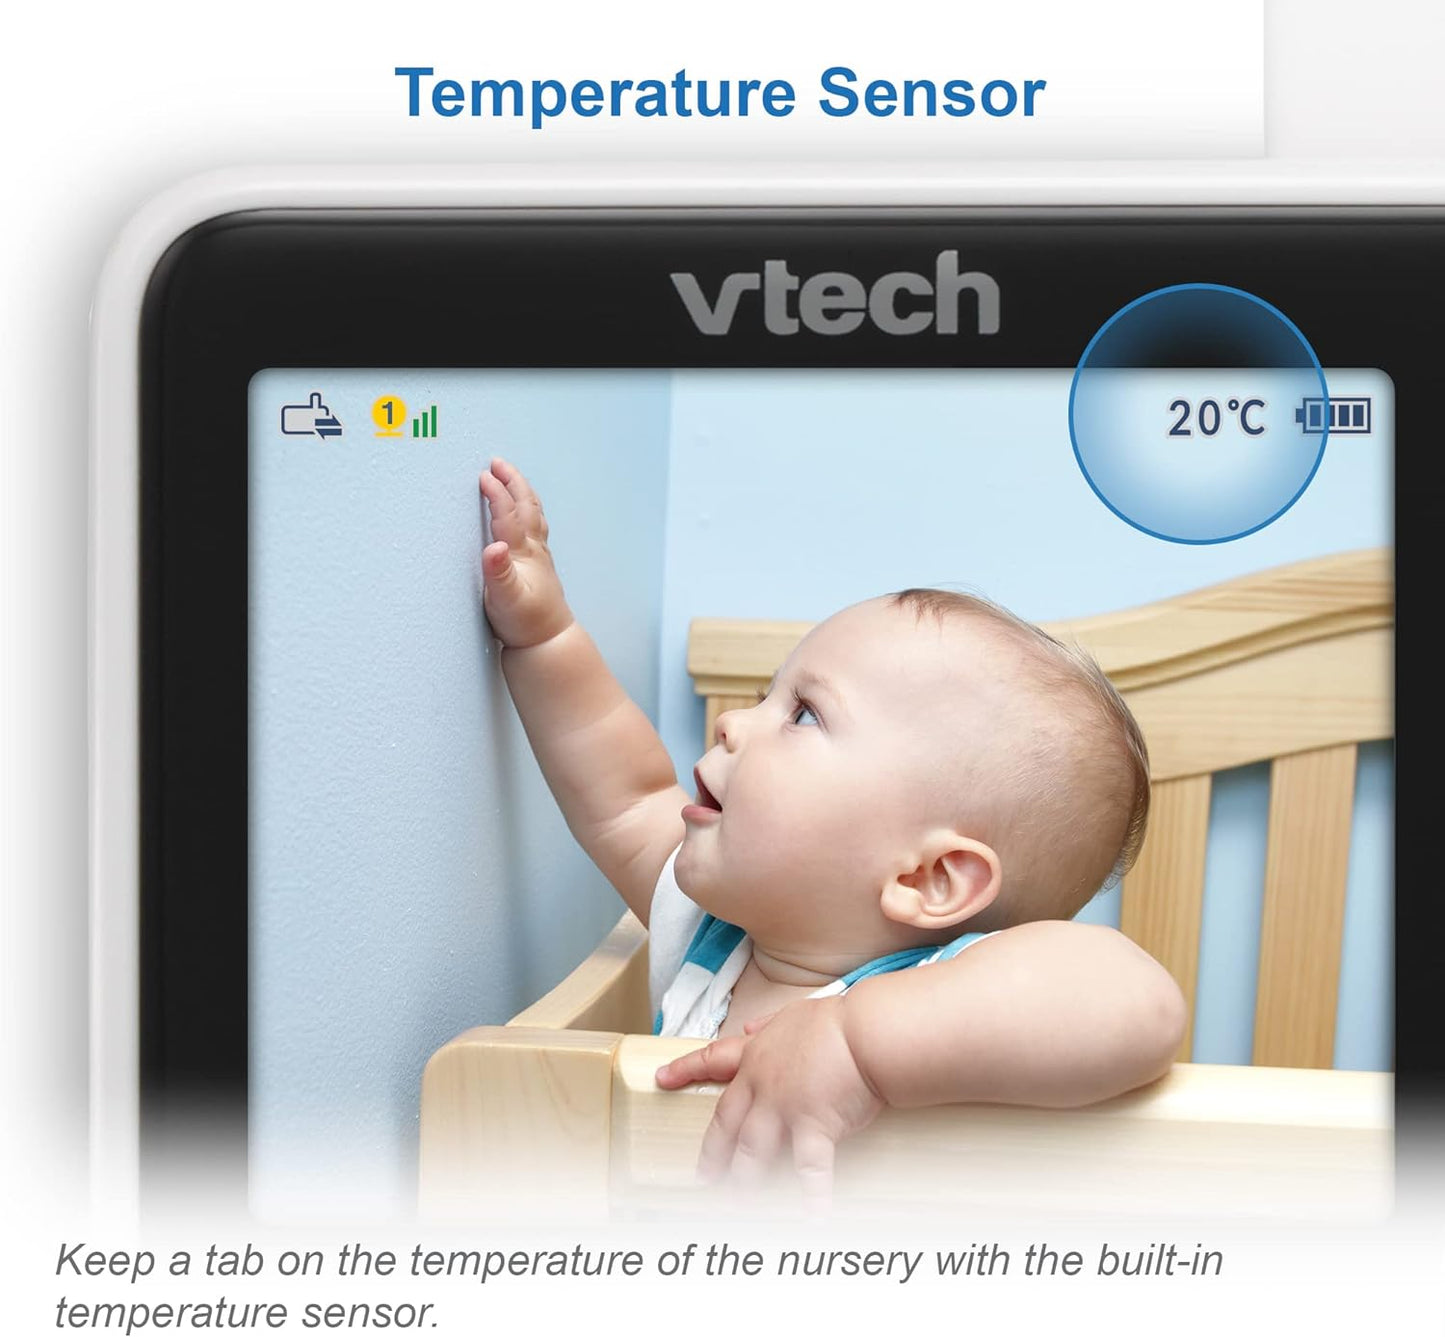 Vtech 2.8" Smart Wi-Fi 1080p HD Video Baby Monitor with Remote Access